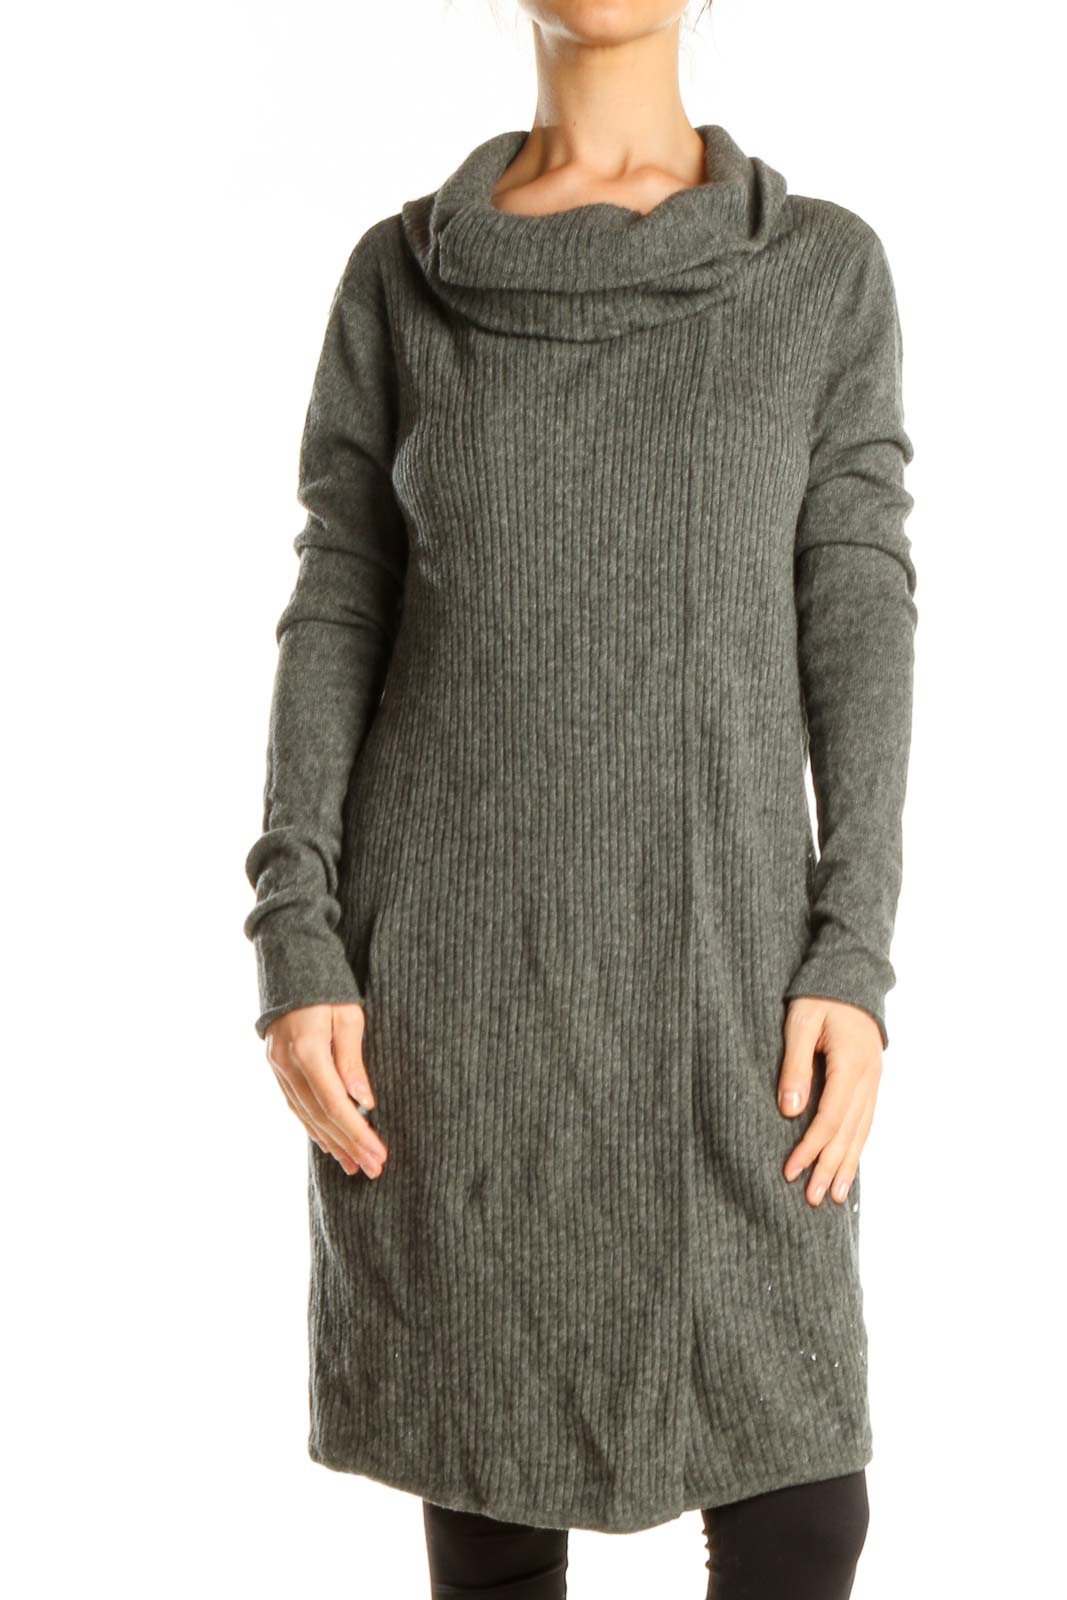 Gray Chic Long Sweater Front